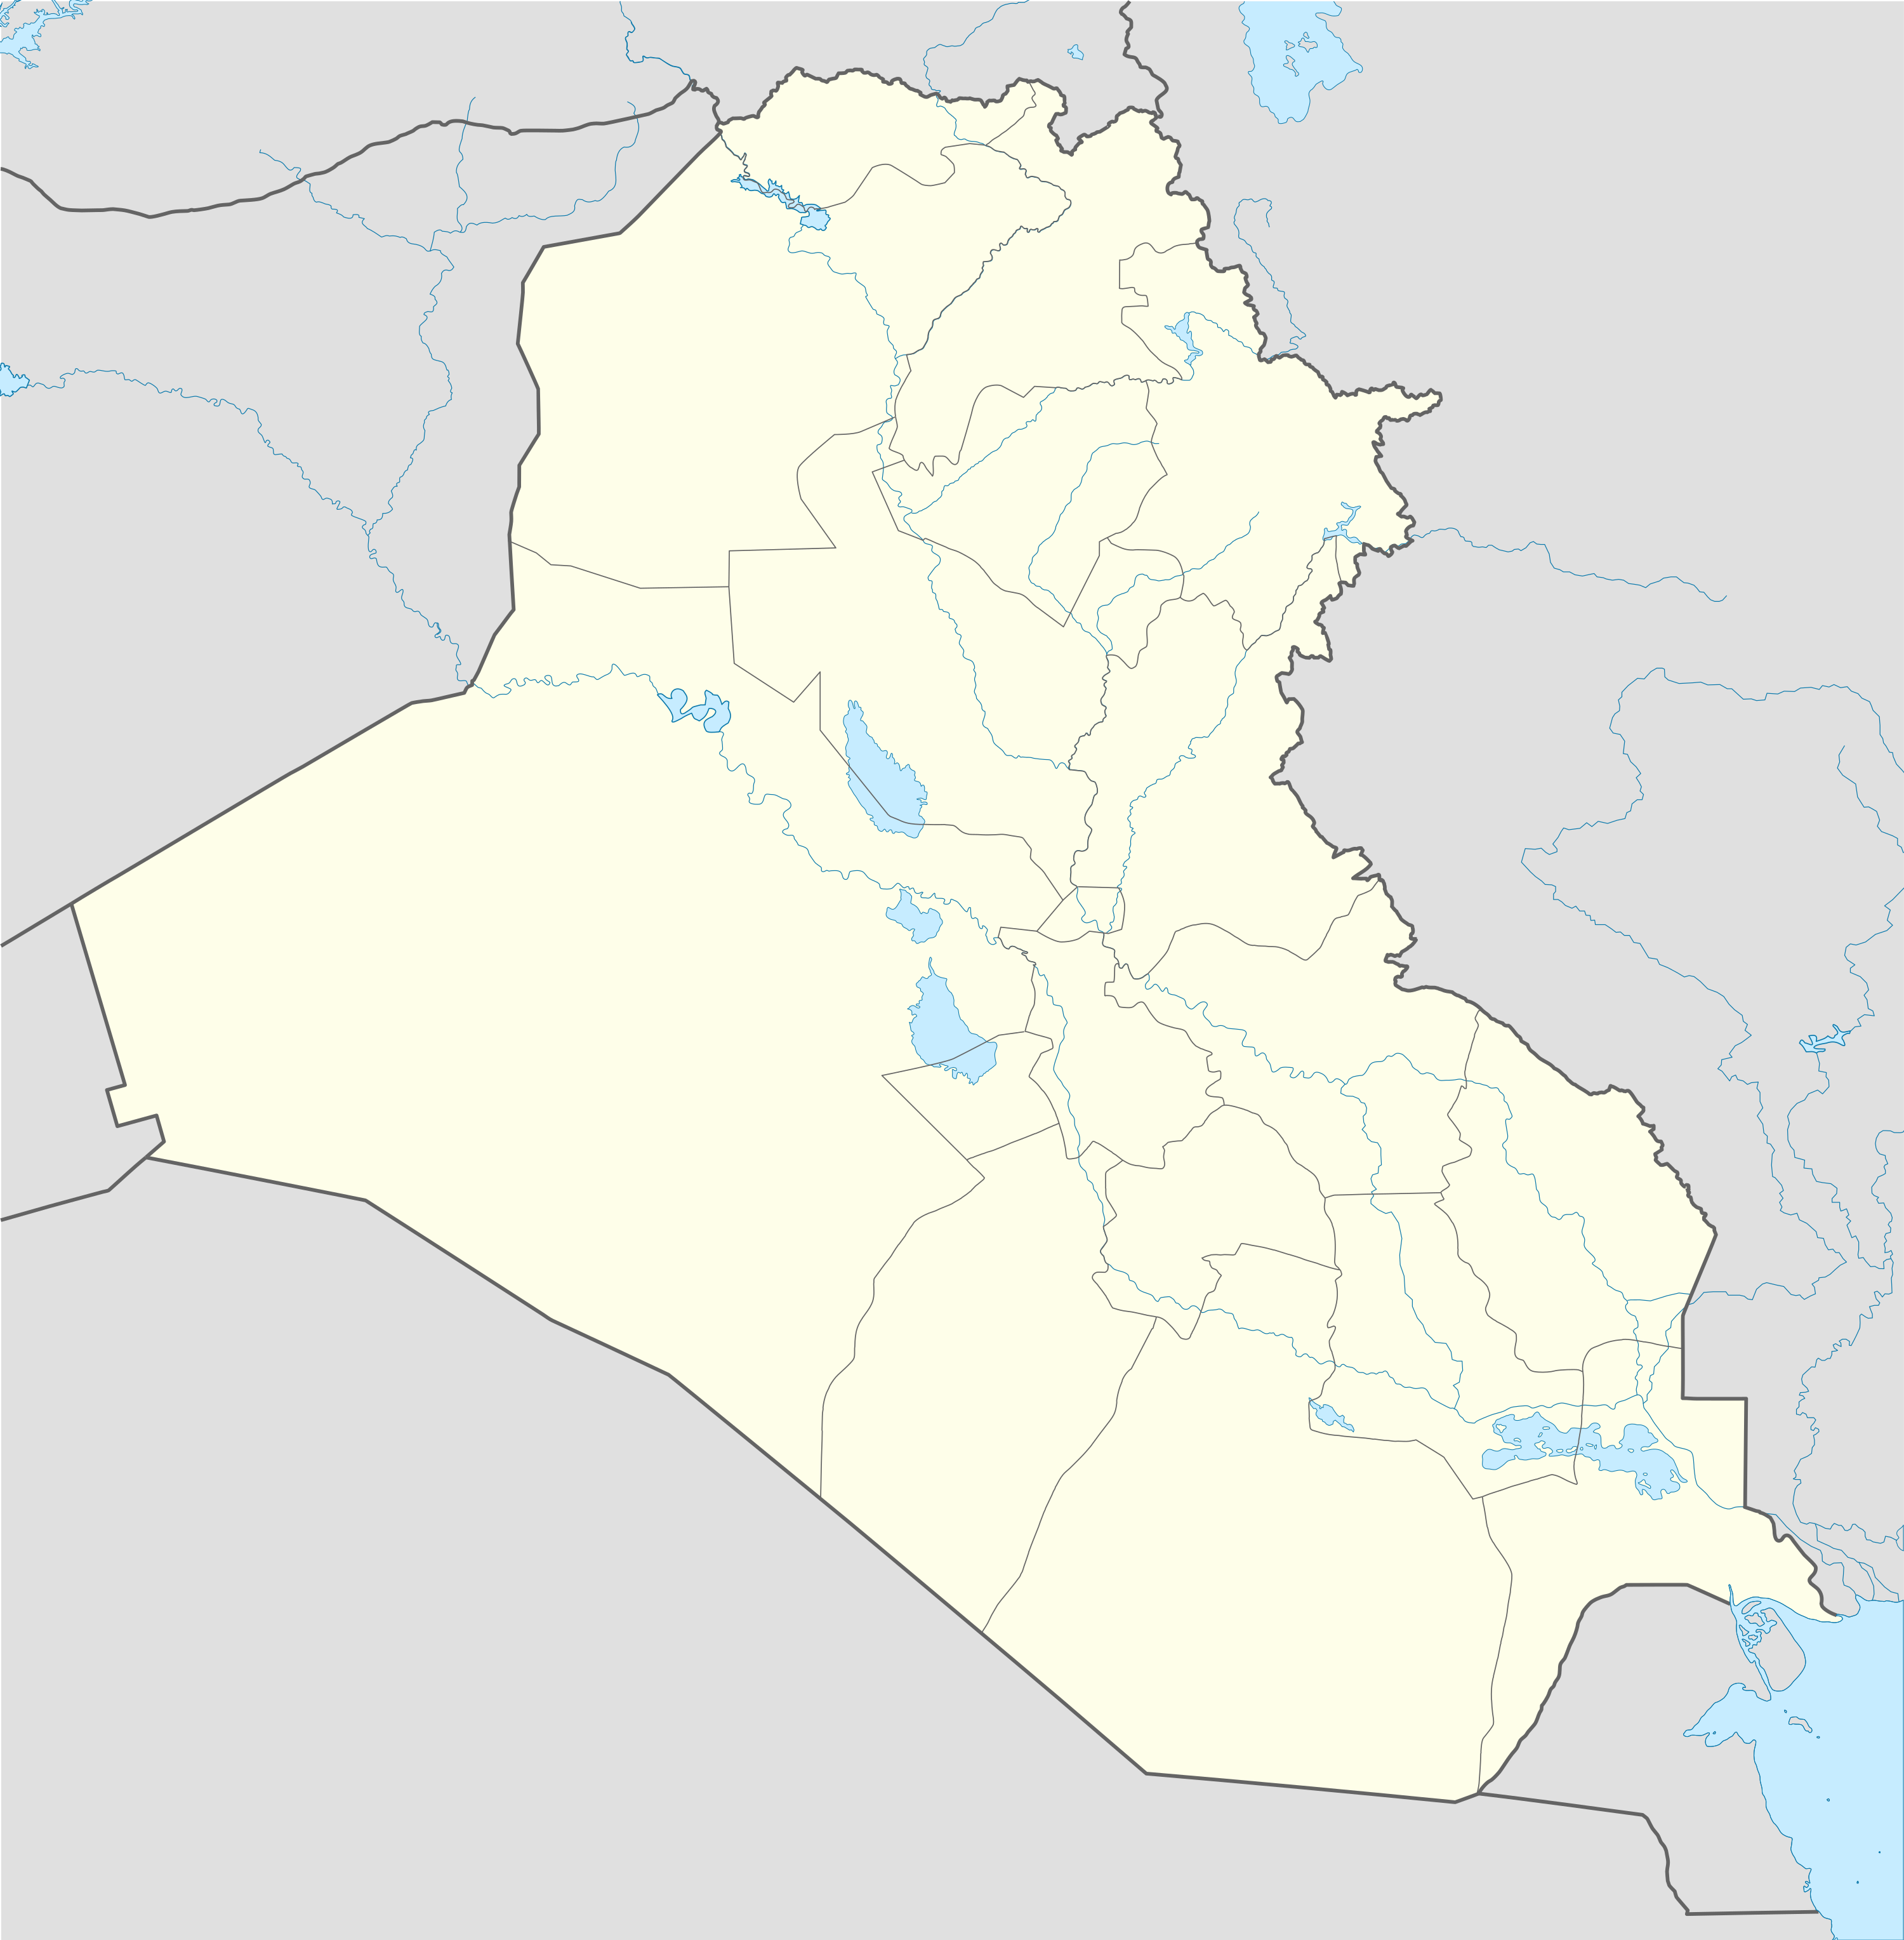 Iraqi insurgency detailed map/doc is located in Iraq